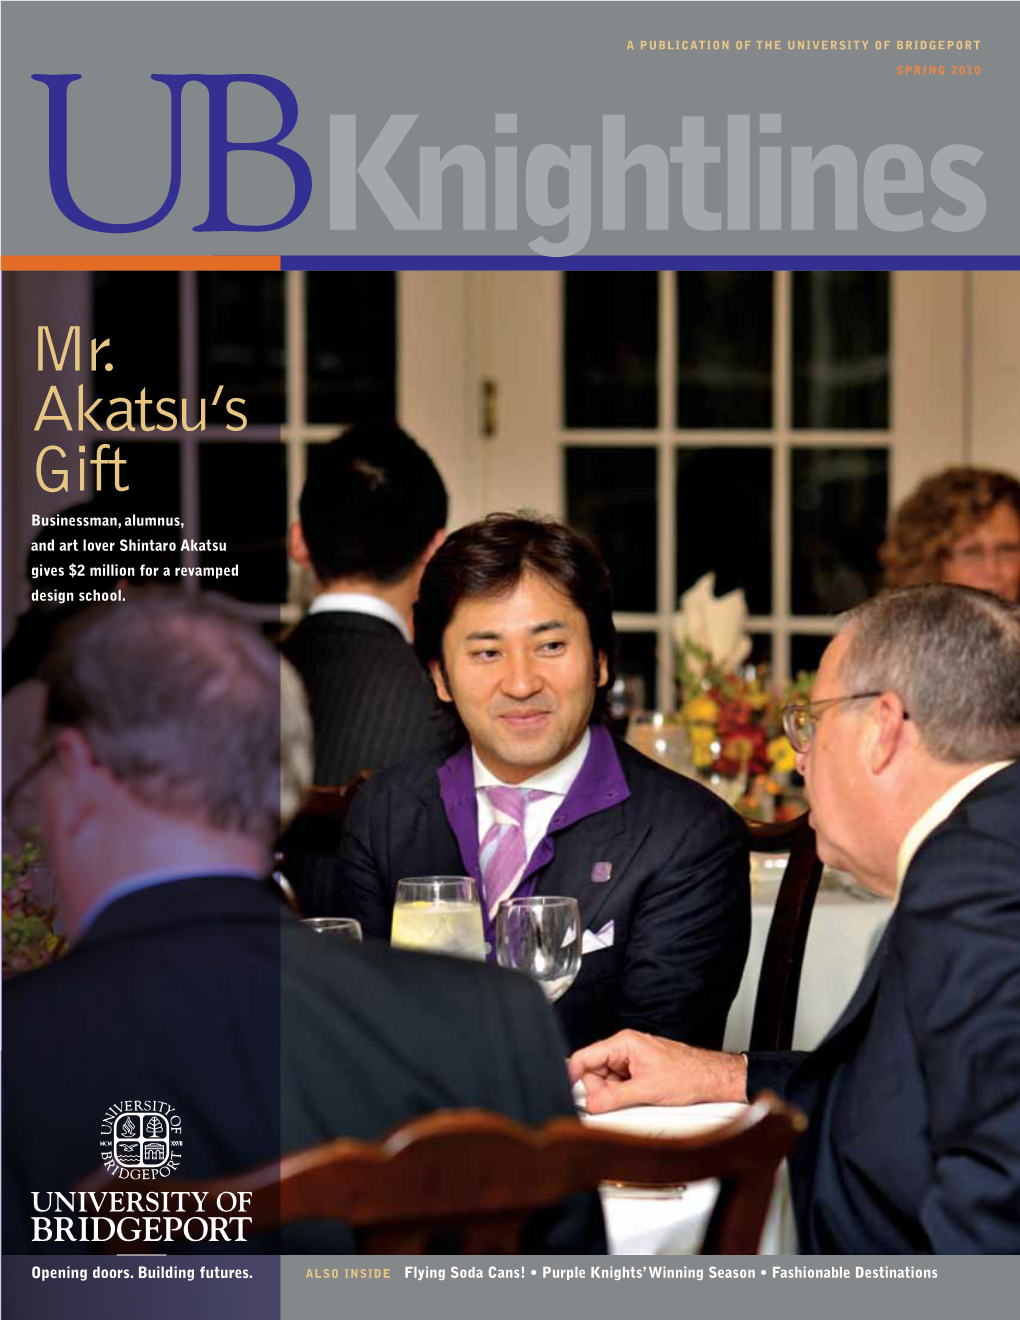 Spring 2010 a Publication of the University of Bridgeport